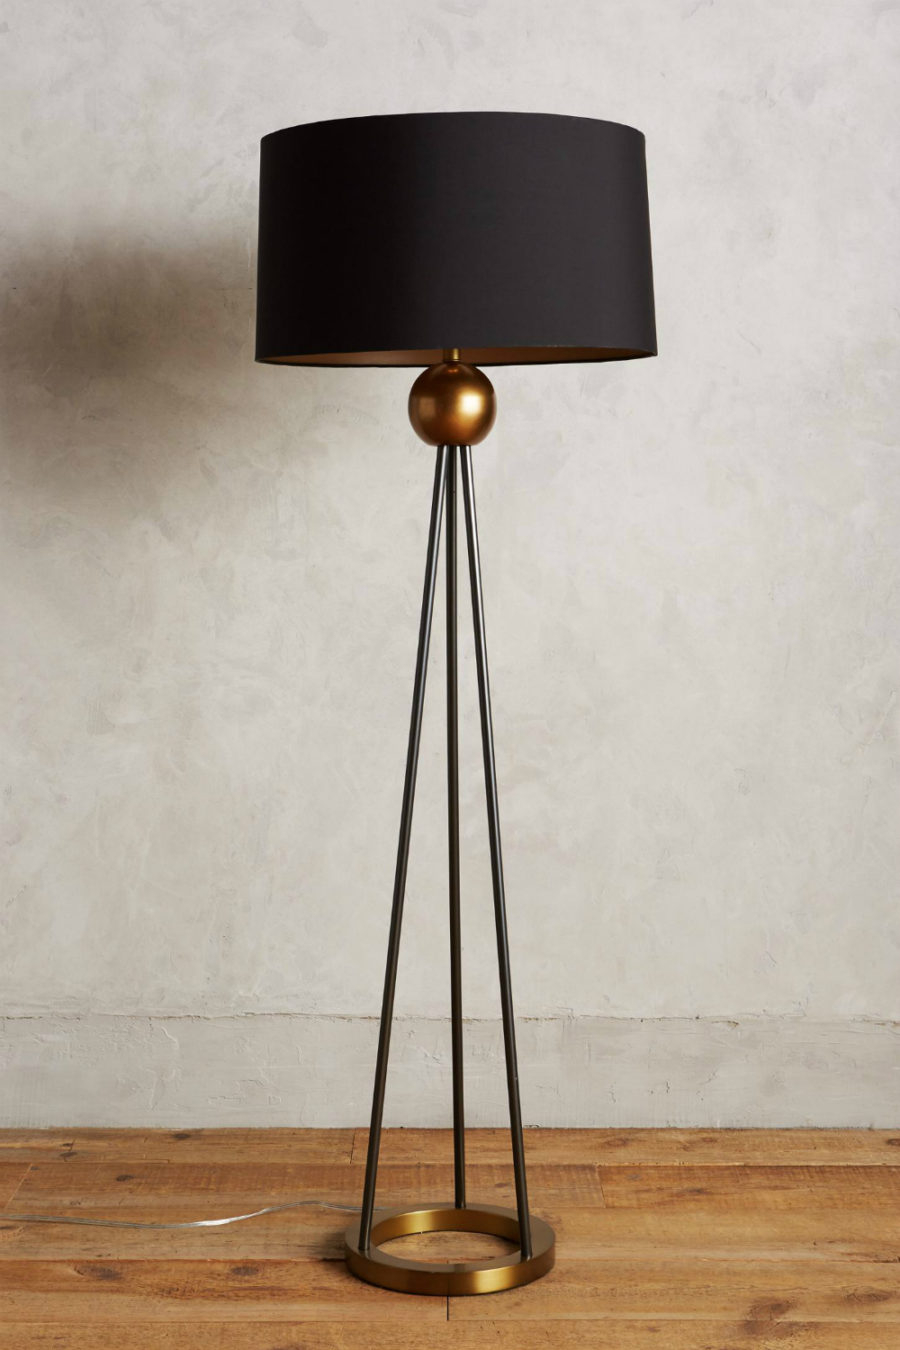 Triangulate Floor Lamp With Table Disacode Home Design pertaining to sizing 900 X 1350